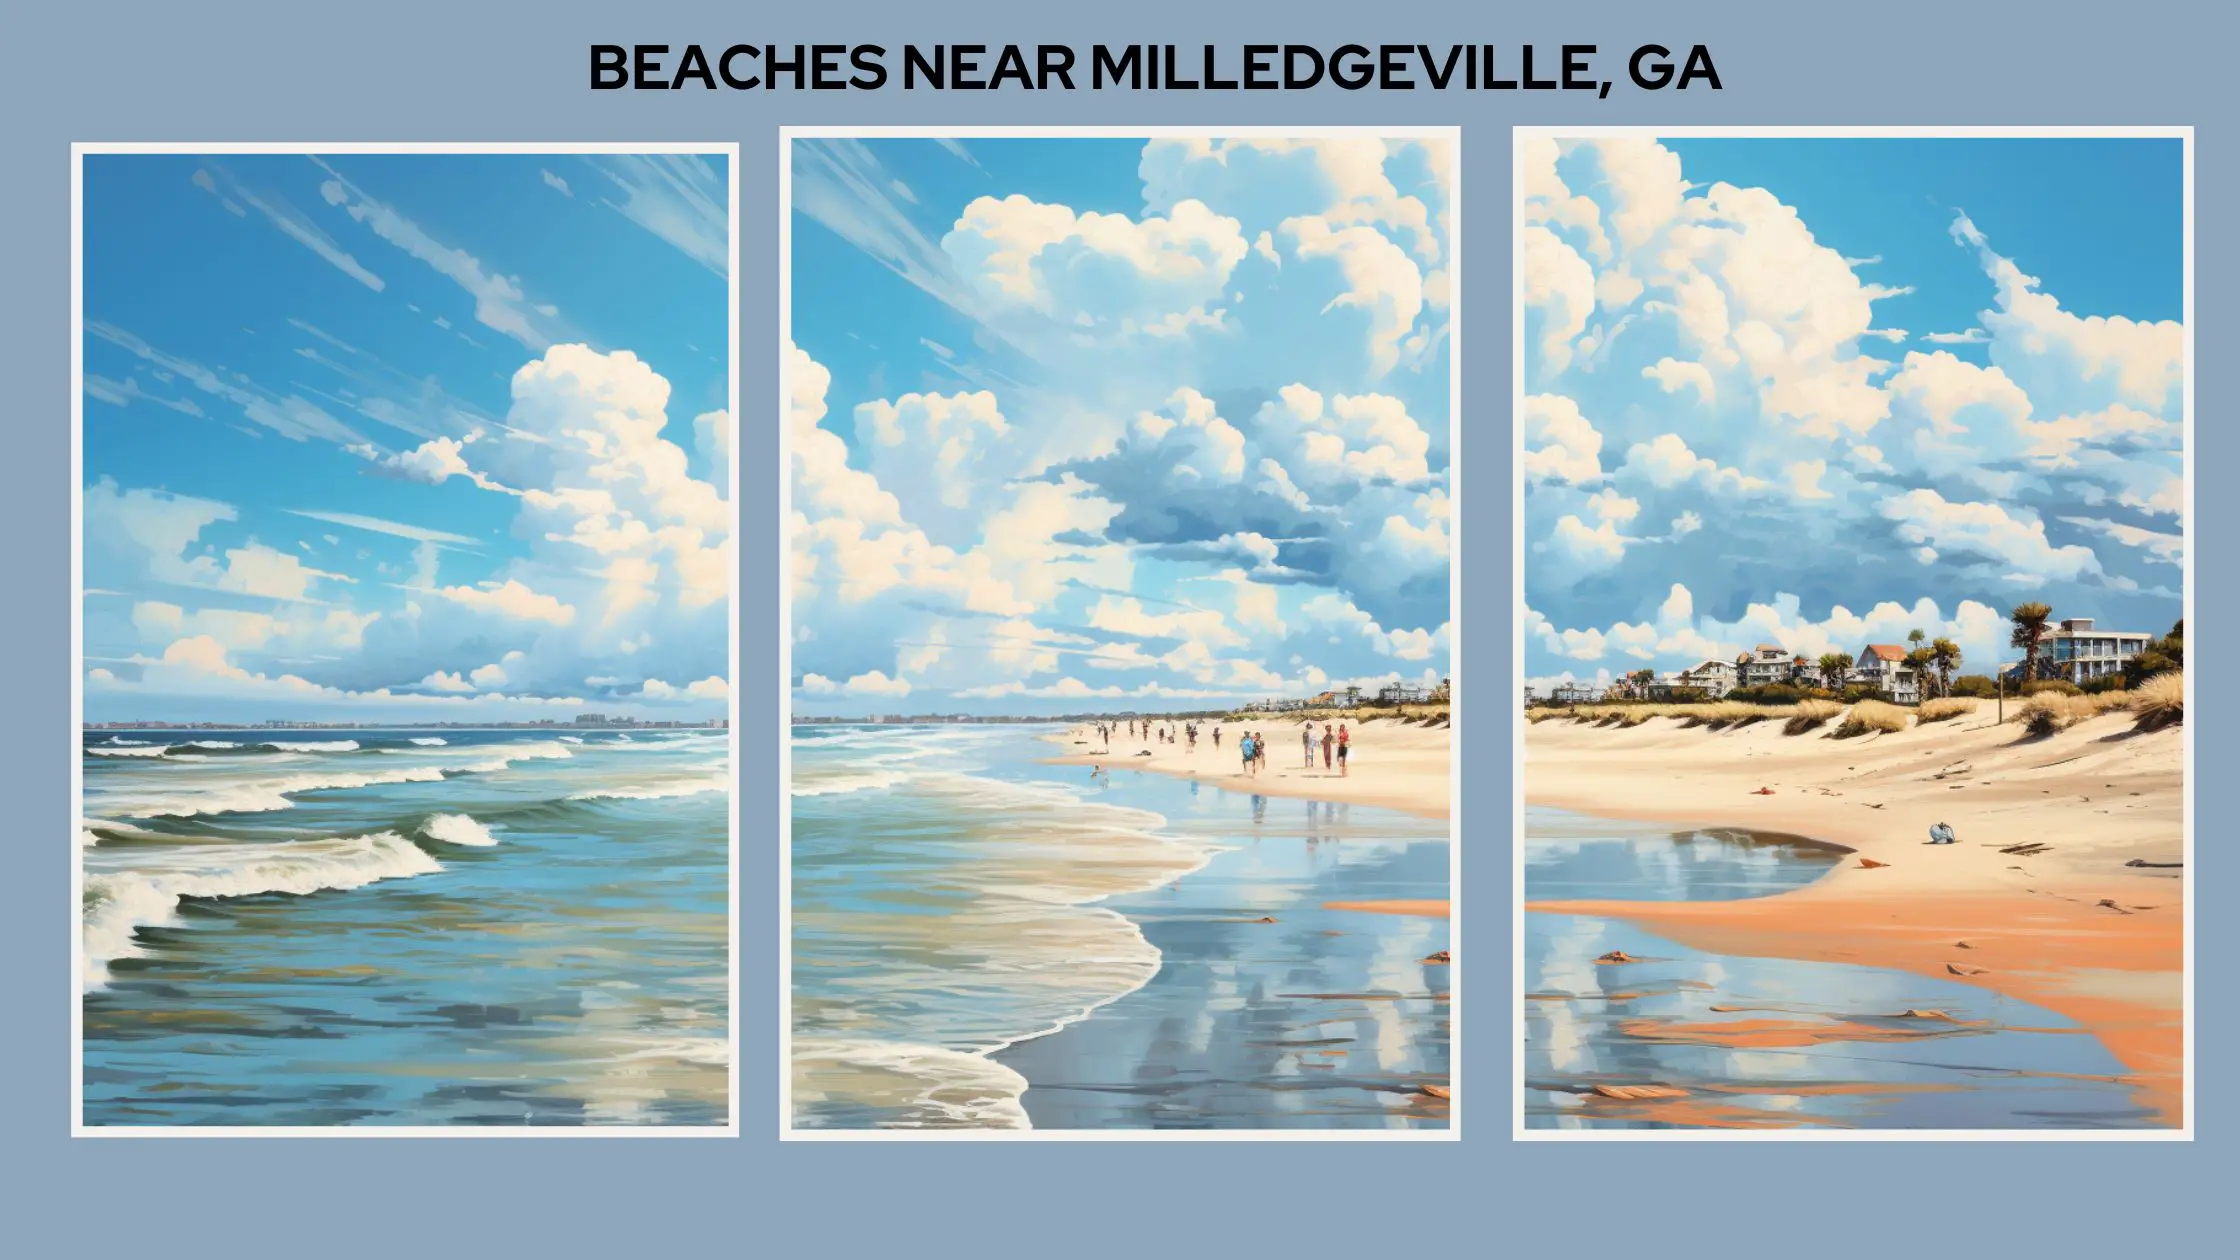 Closest beaches to milledgeville ga cover photo